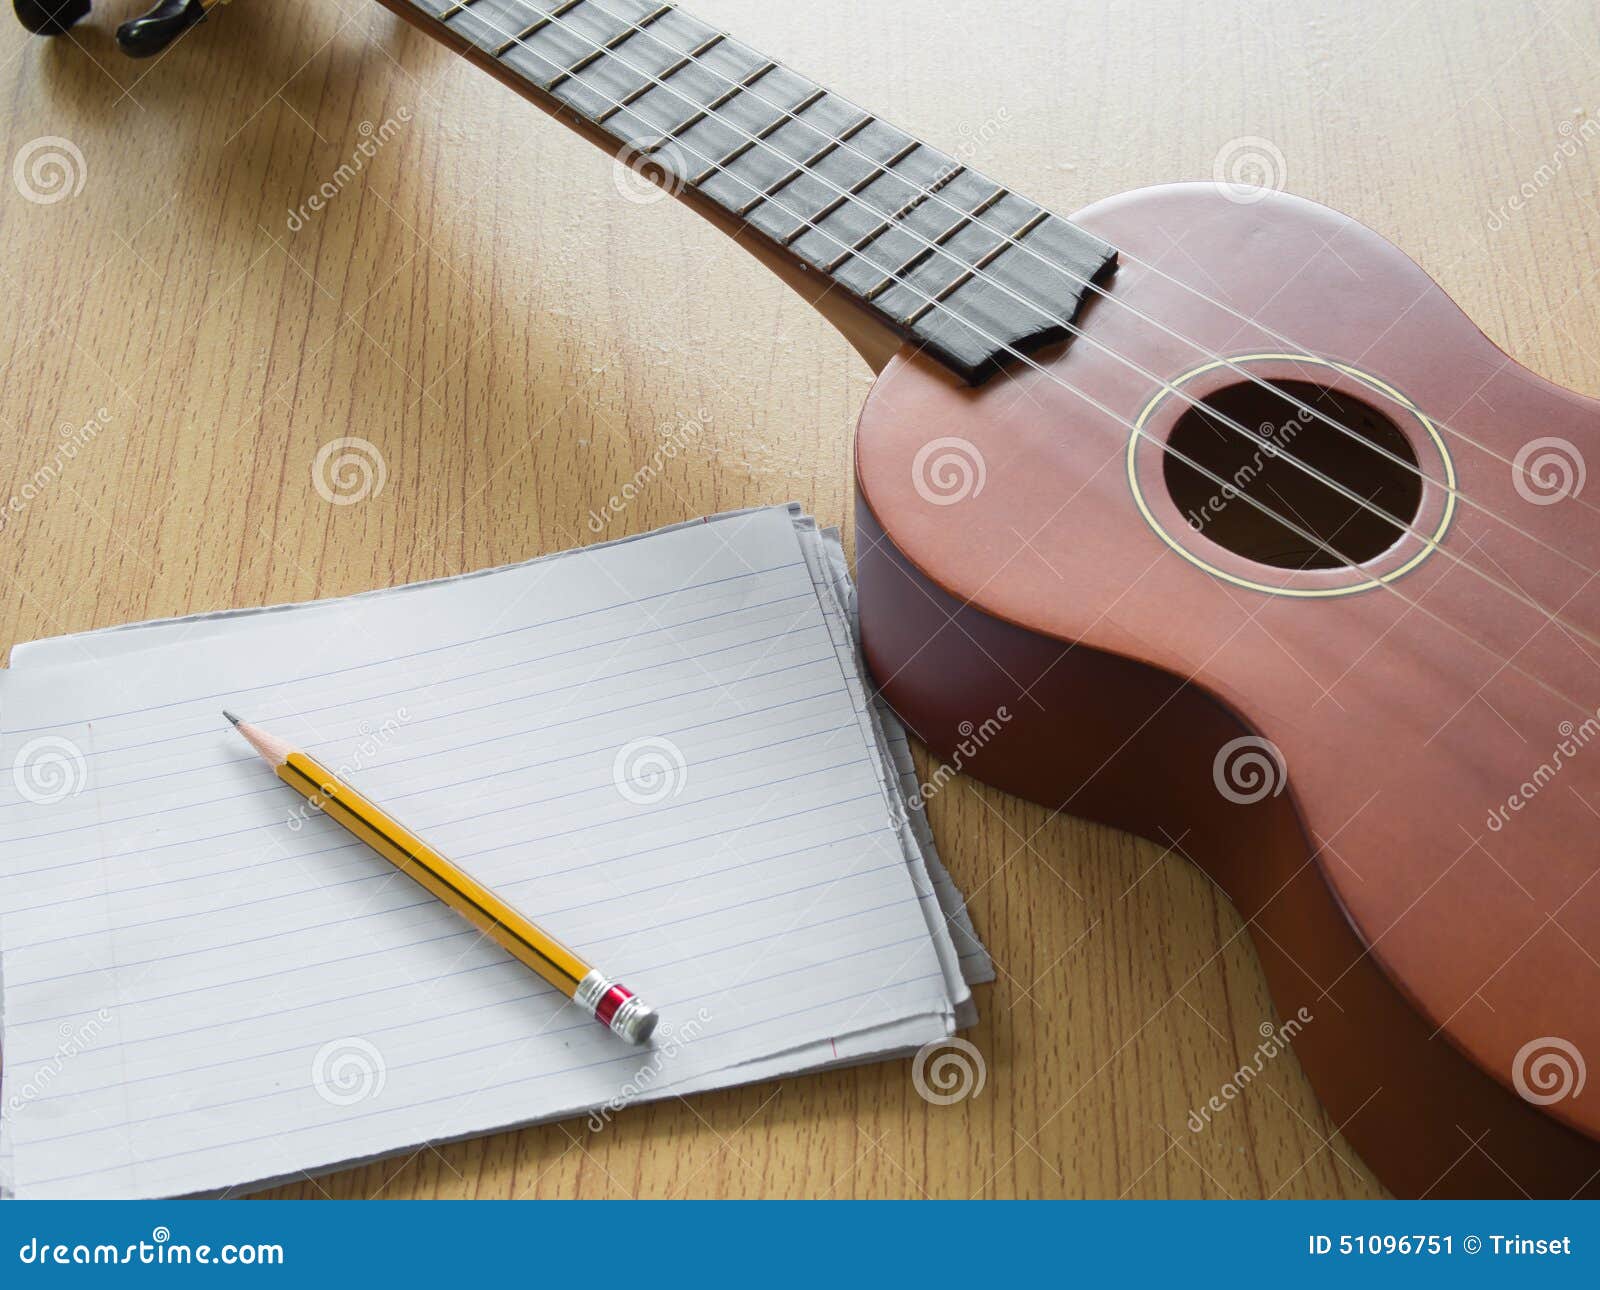 How to write an essay about my best friend in french ukulele